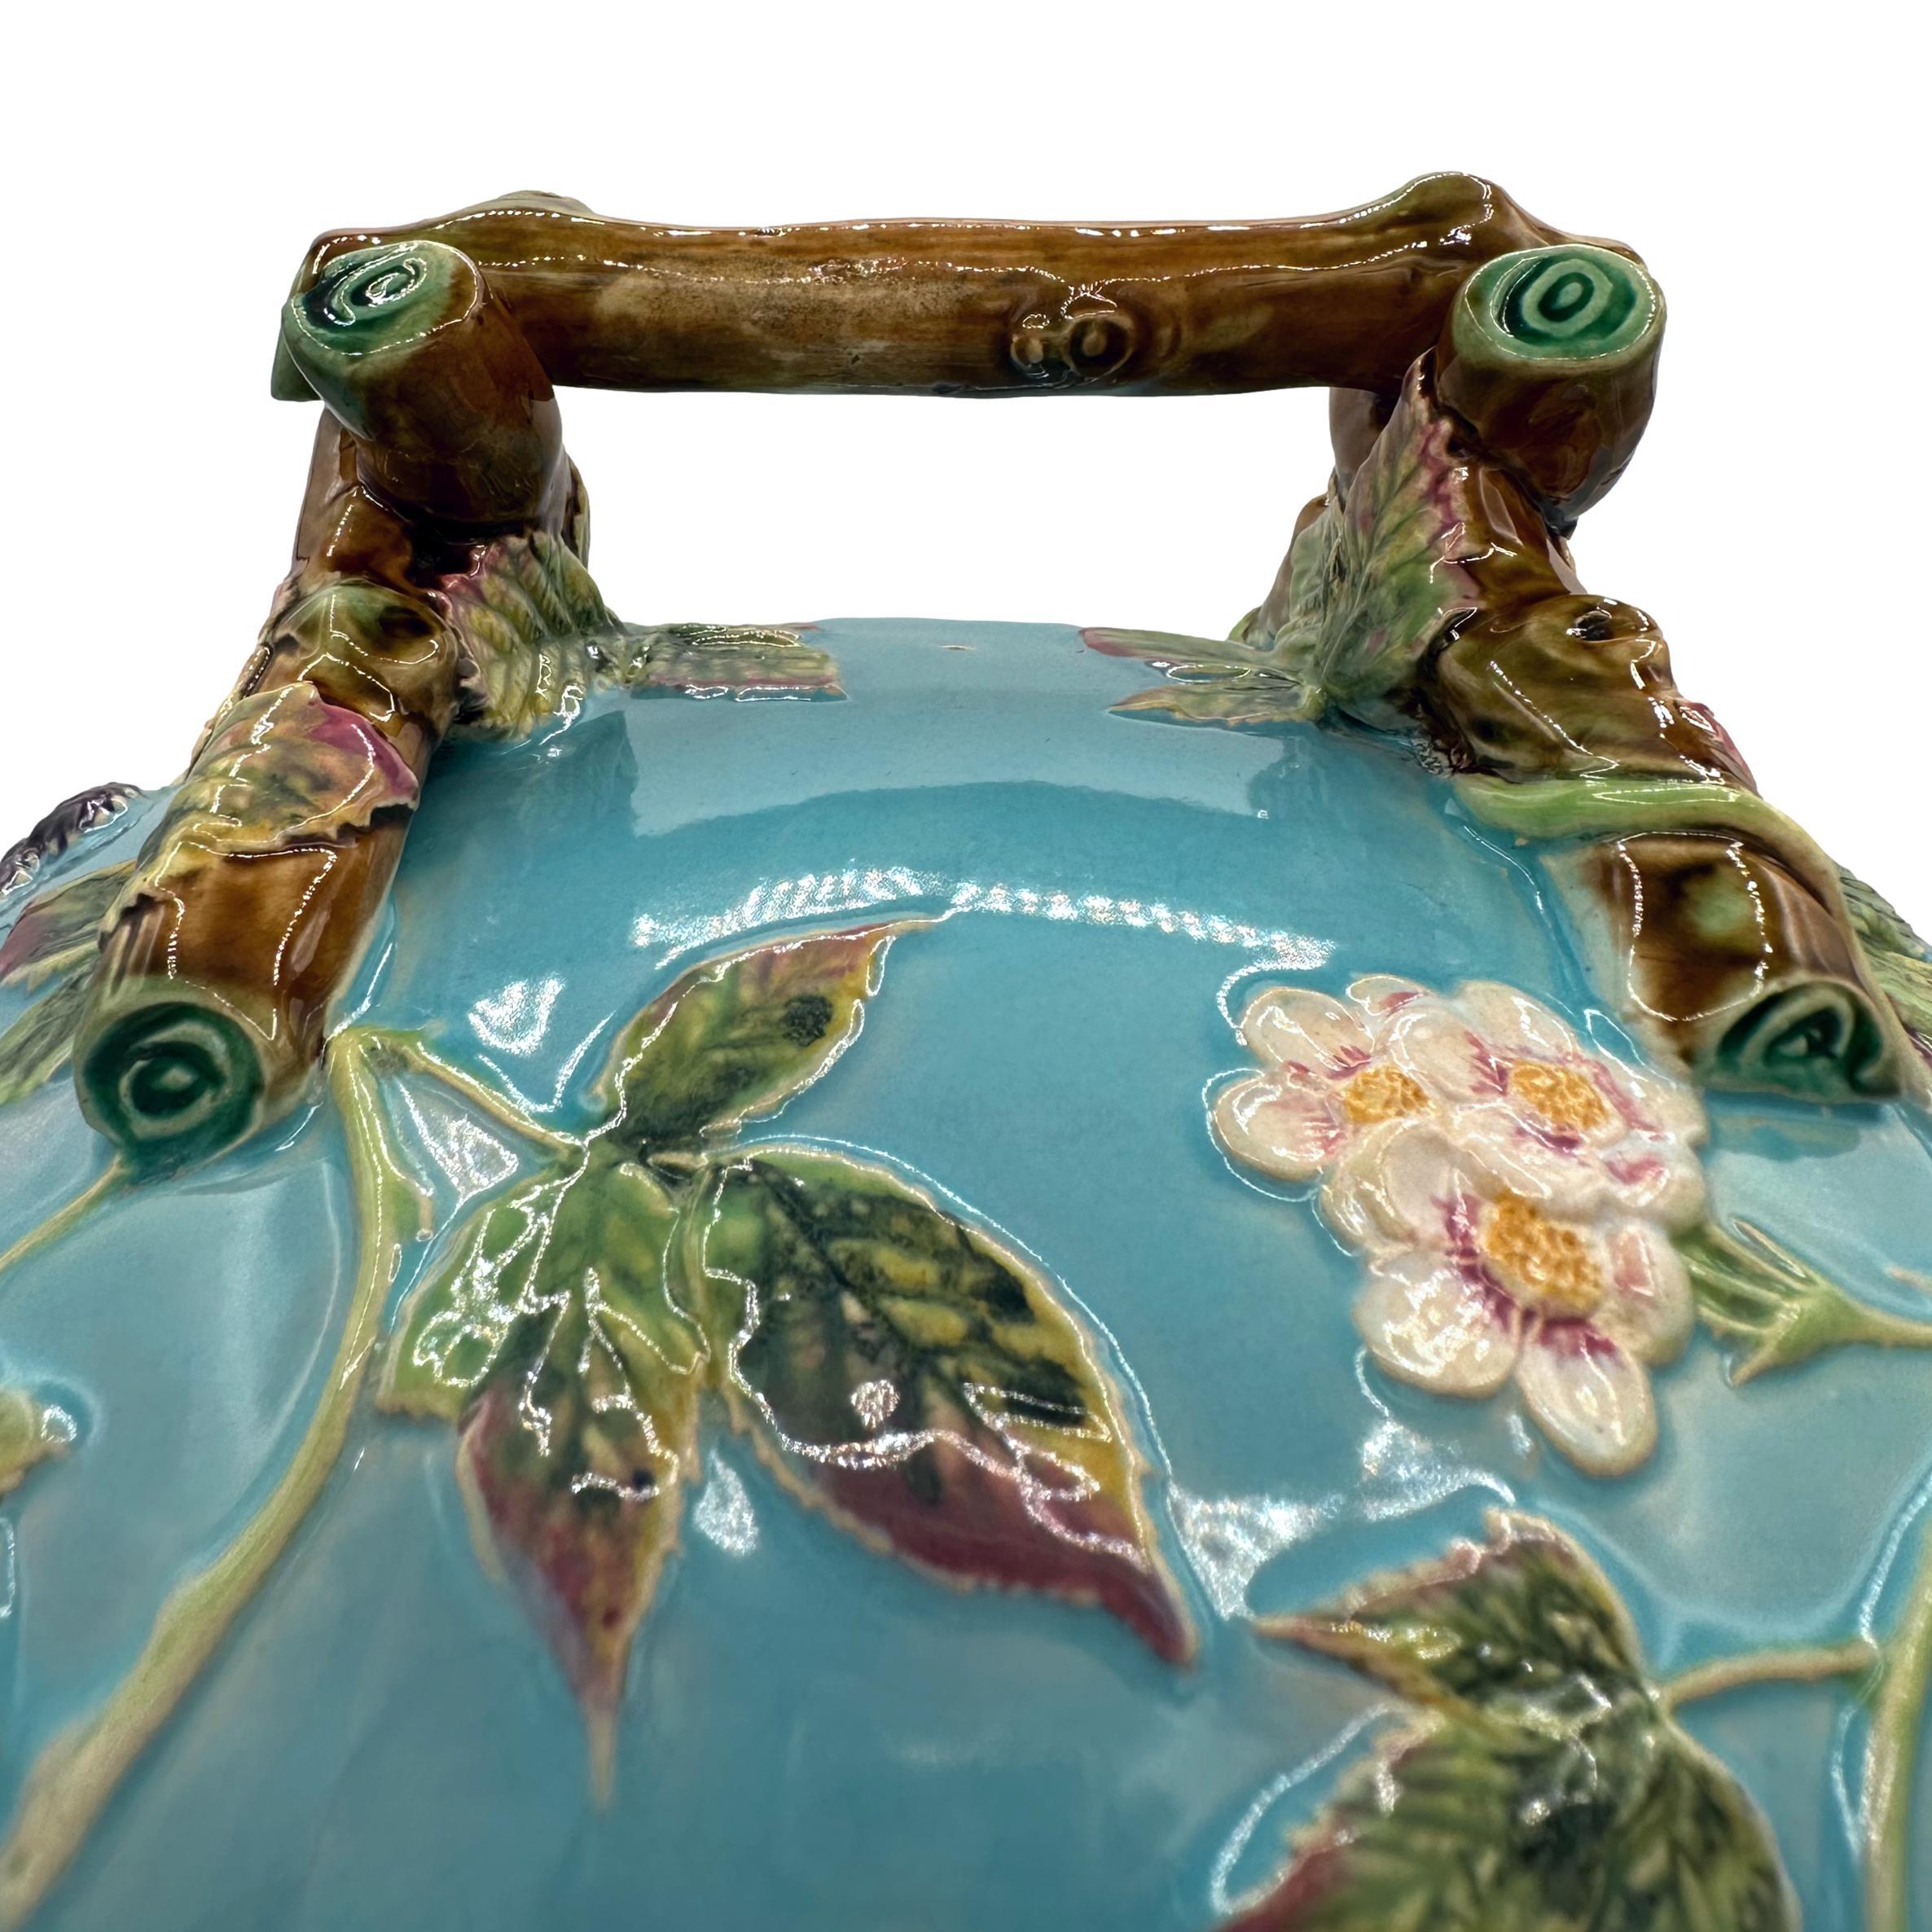 A Large George Jones Majolica Cheese Bell with Daisys, Bees and Fence, ca. 1878 In Good Condition For Sale In Banner Elk, NC